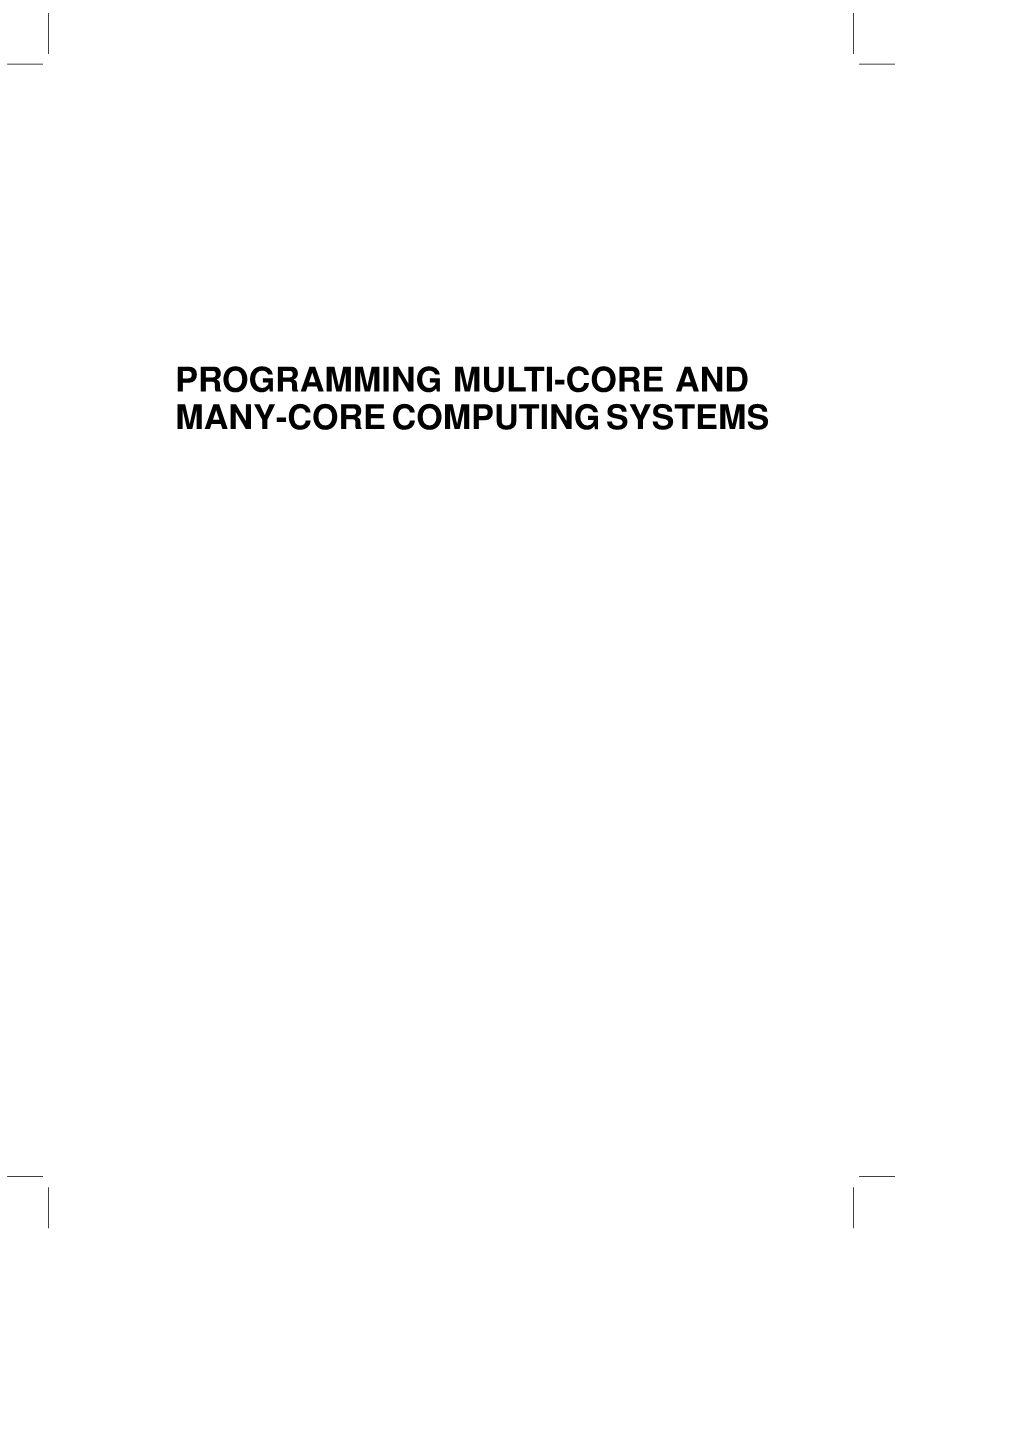 Operating System and Scheduling for Future Multi-Core and Many-Core Platforms